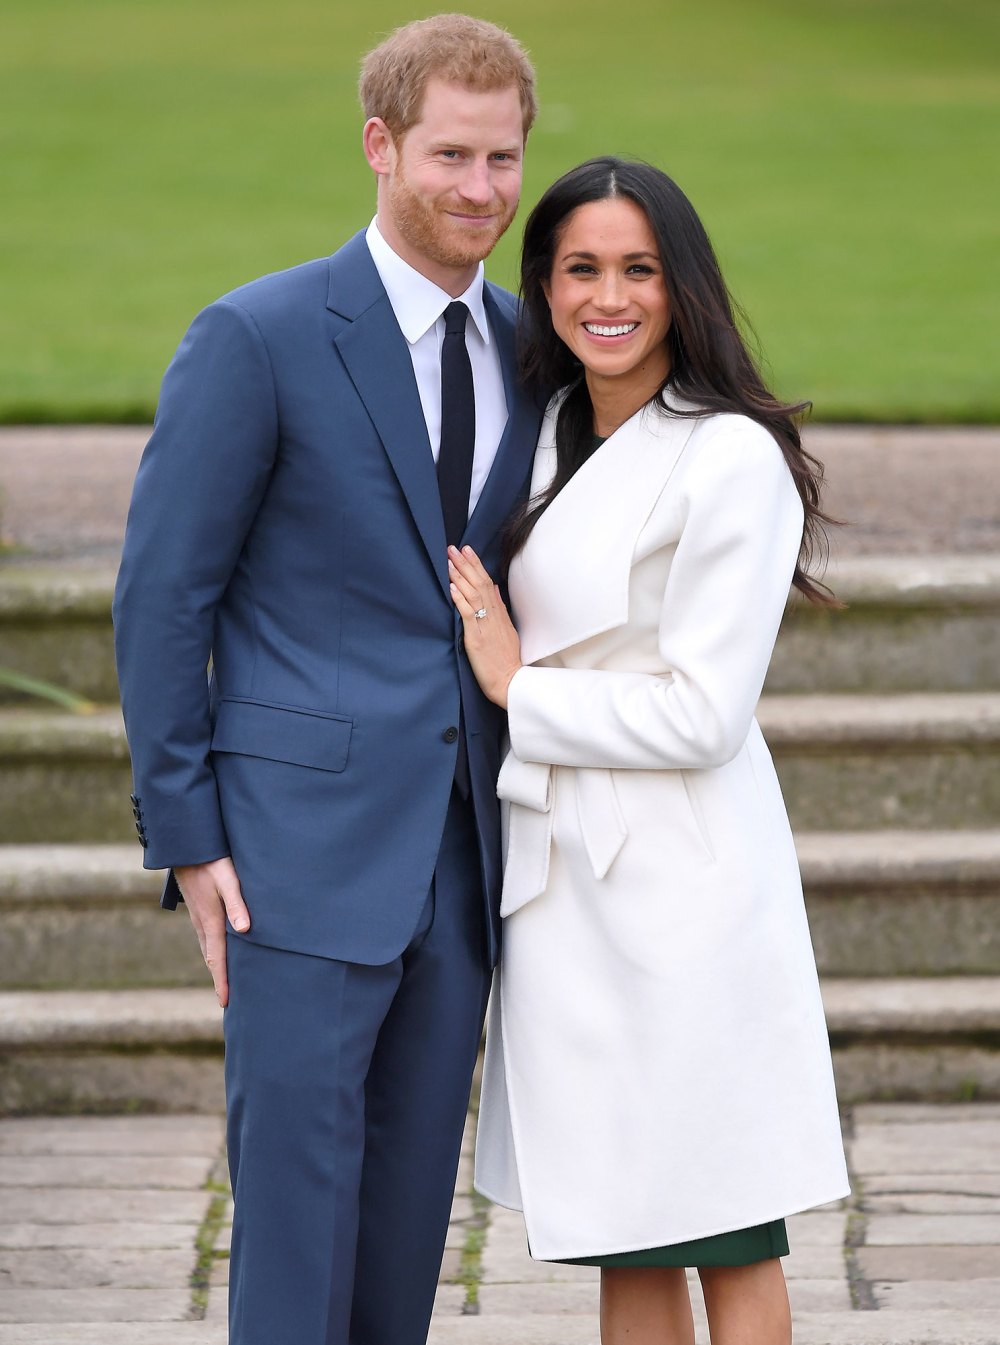 Royal Family Website Removes Prince Harry 2016 Statement Confirming Meghan Markle Romance 3